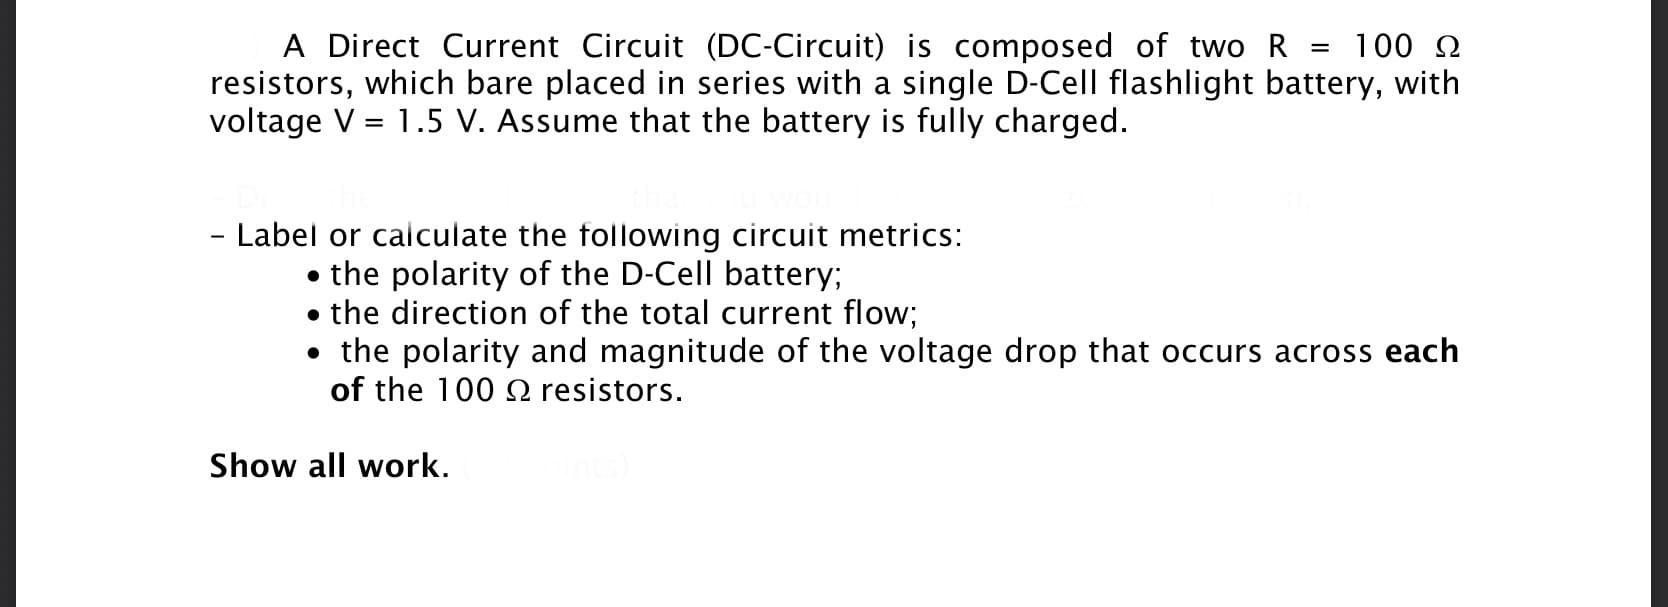 A Direct Current Circuit (DC-Circuit) is composed of two R = 100 2
resistors, which bare placed in series with a single D-Cell flashlight battery, with
voltage V = 1.5 V. Assume that the battery is fully charged.
- Label or caiculate the following circuit metrics:
• the polarity of the D-Cell battery;
the direction of the total current flow;
• the polarity and magnitude of the voltage drop that occurs across each
of the 100 2 resistors.
Show all work.
